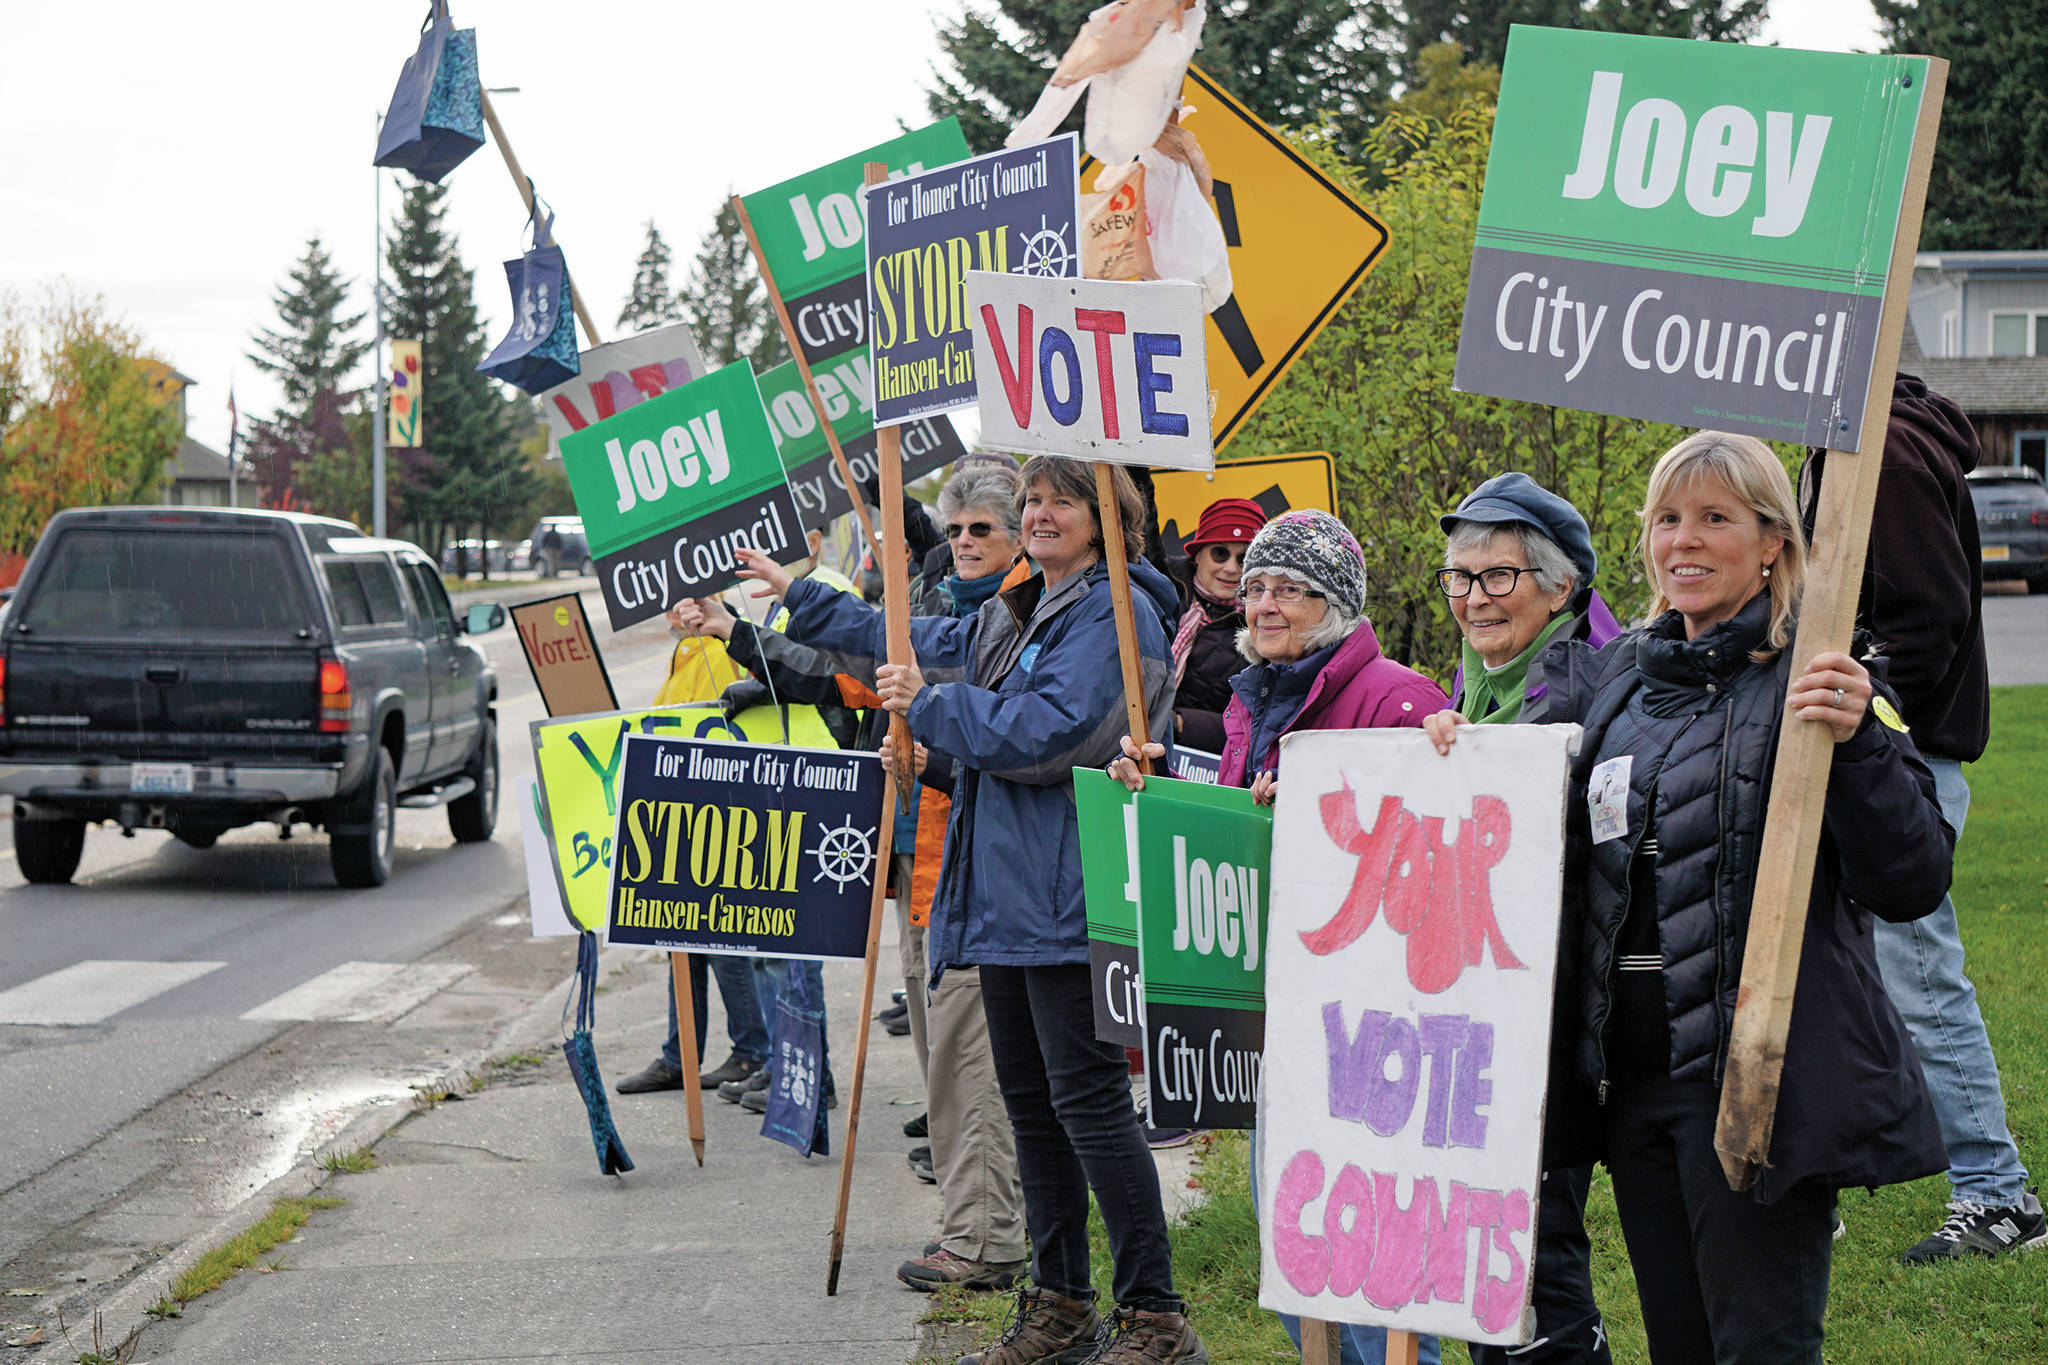 Supporters wave signs in support of Proposition A, to ban single-use plastic bags, and for Homer City Council candidates Joey Evensen and Storm Hansen-Cavasos on Tuesday, Oct. 1, 2019, at WKFL Park in Homer, Alaska. (Photo by Michael Armstrong/Homer News)